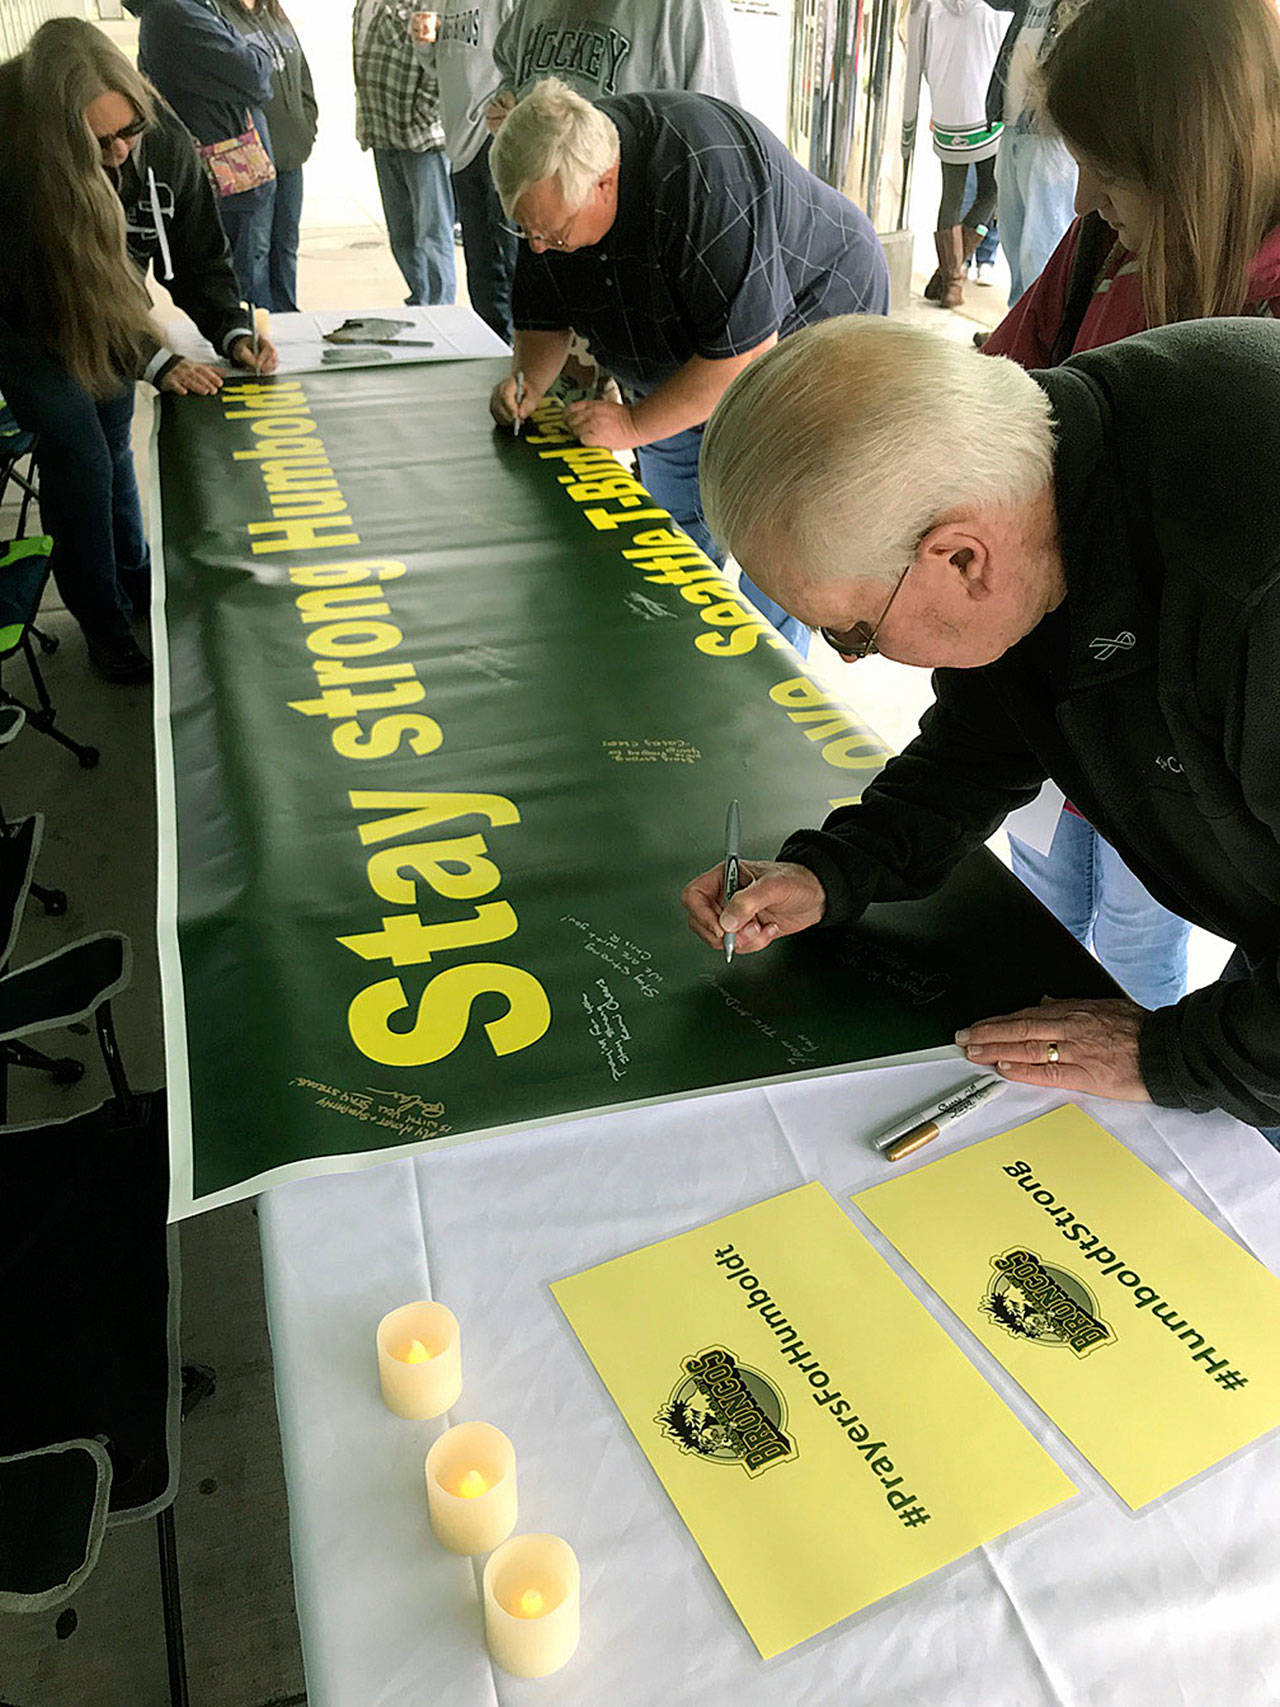 Bruce McDonald, foreground, and his 15-year-old granddaughter, Chloe, join others outside the accesso ShoWare Center on Saturday in signing a banner supporting the Humboldt, Saskatchewan junior hockey team. MARK KLAAS, Kent Reporter